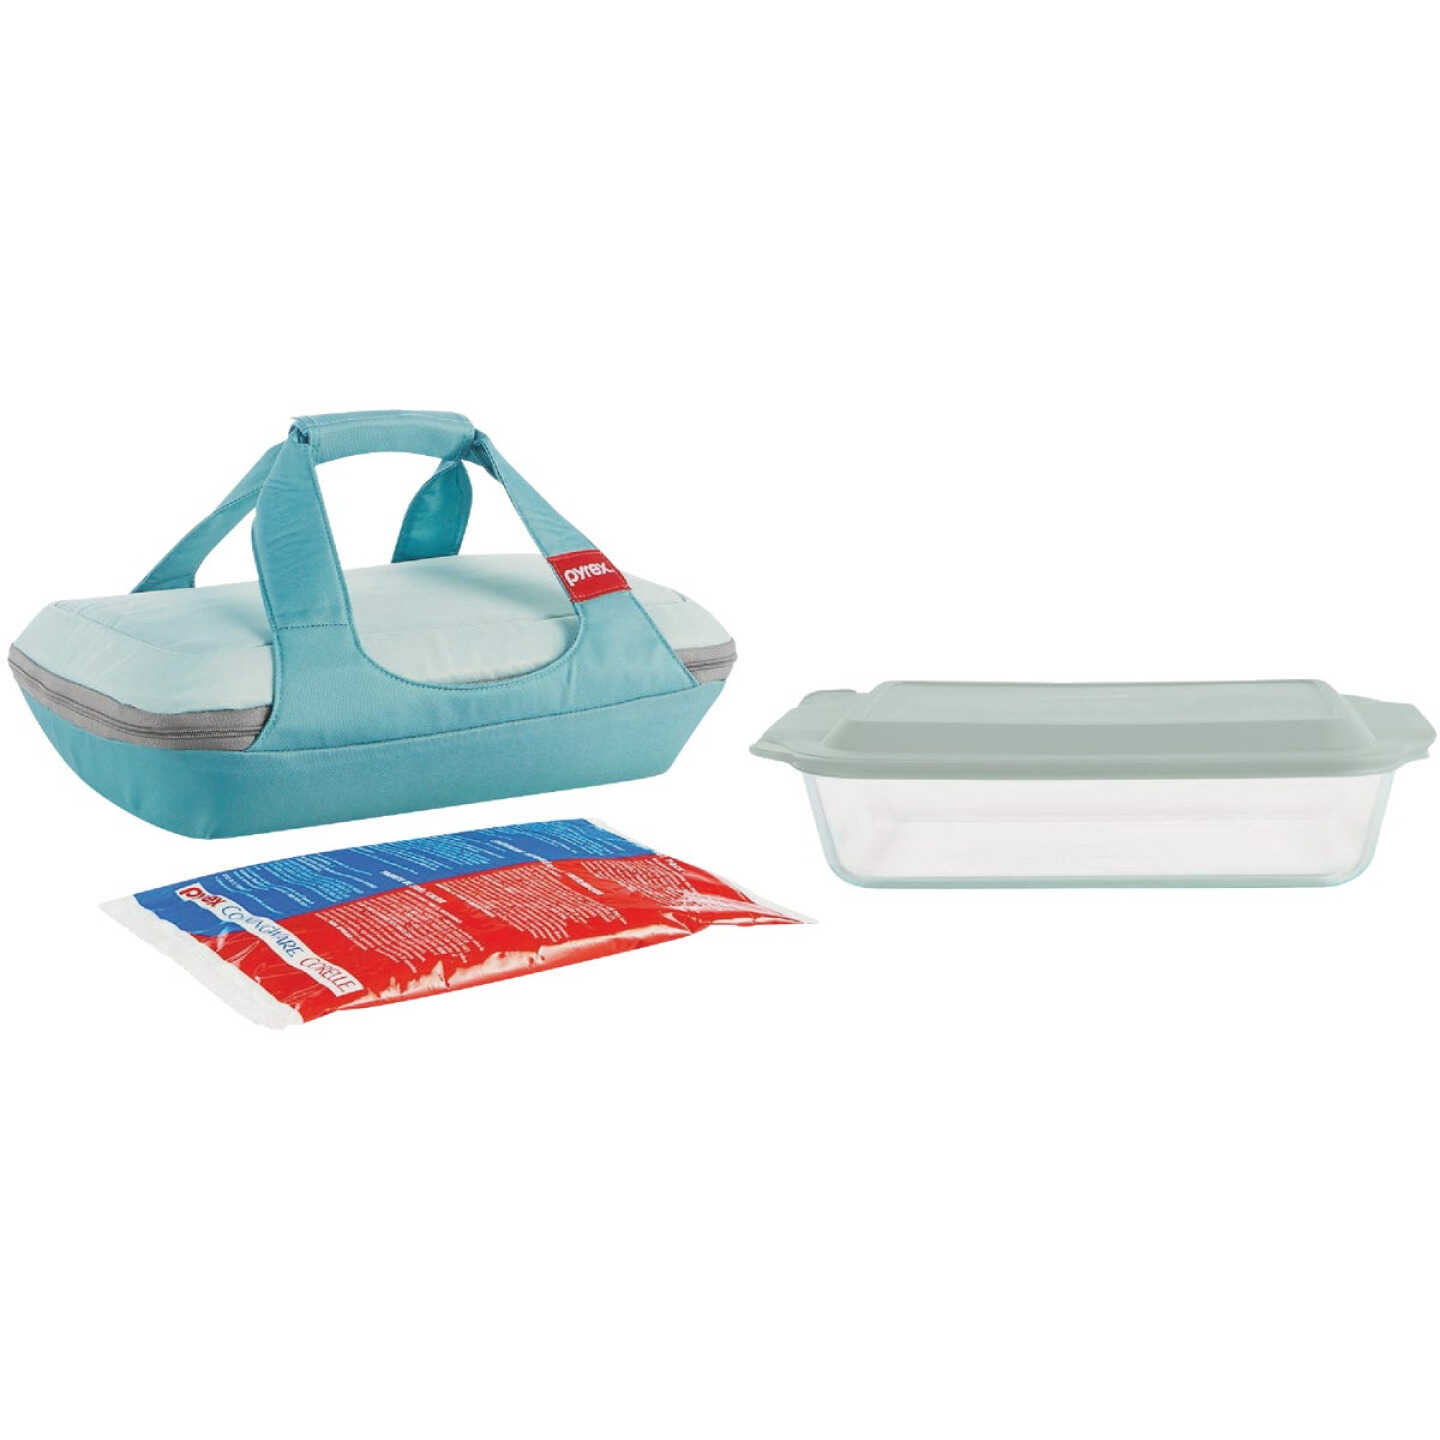 Pyrex Basics 8 Square with red cover (2 PACK)